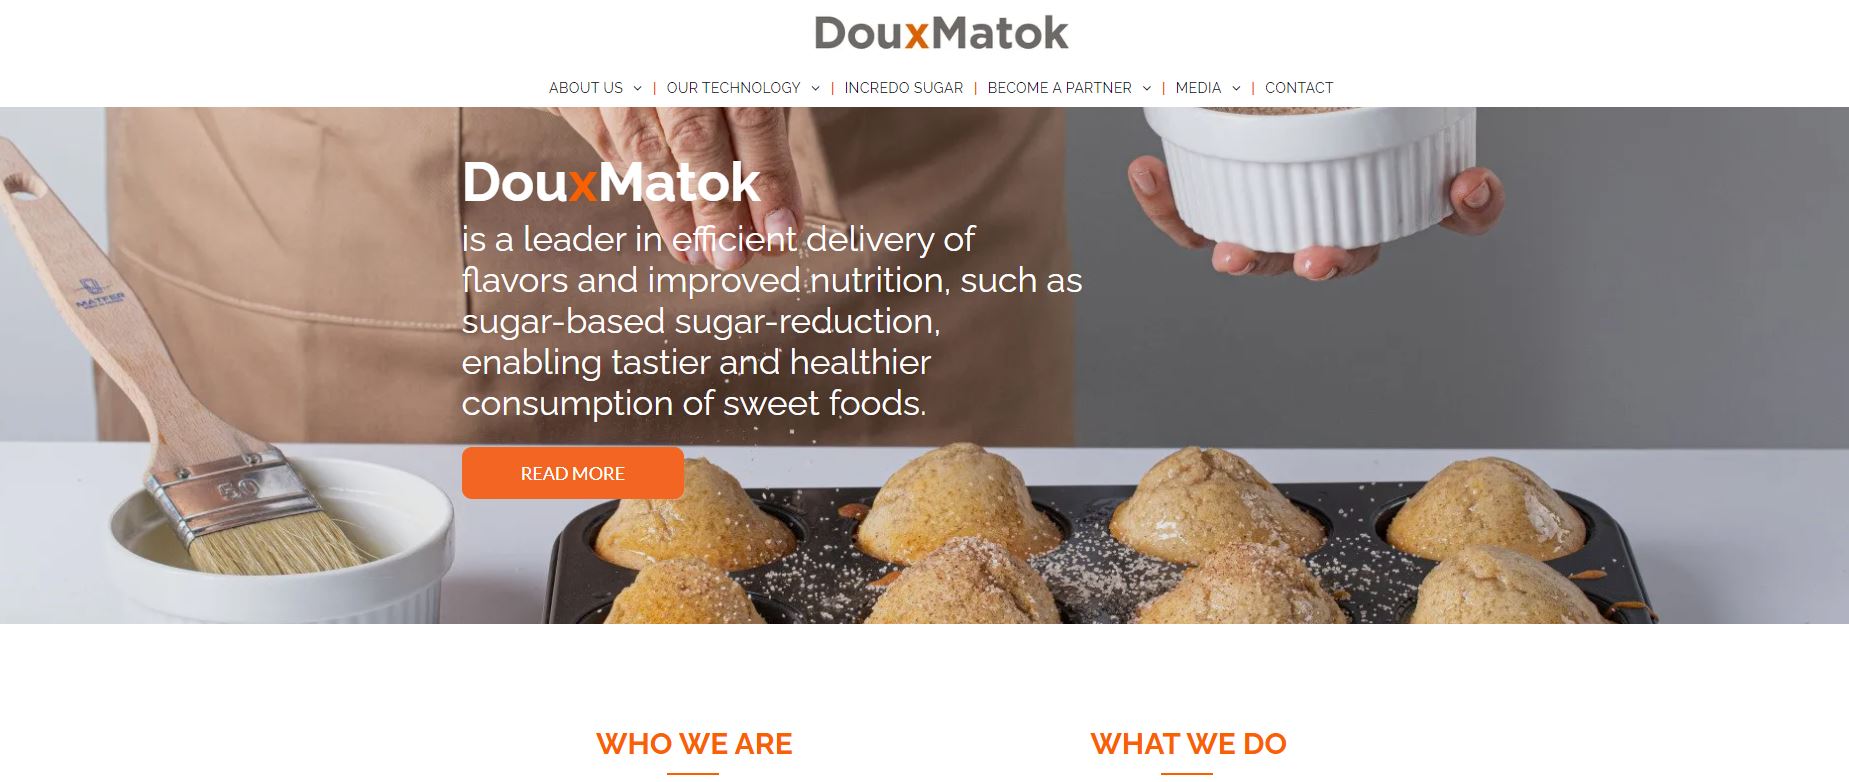 With a remarkable $30 million raised in a Series C funding round, DouxMatok is revolutionizing the way we enjoy sweet foods.